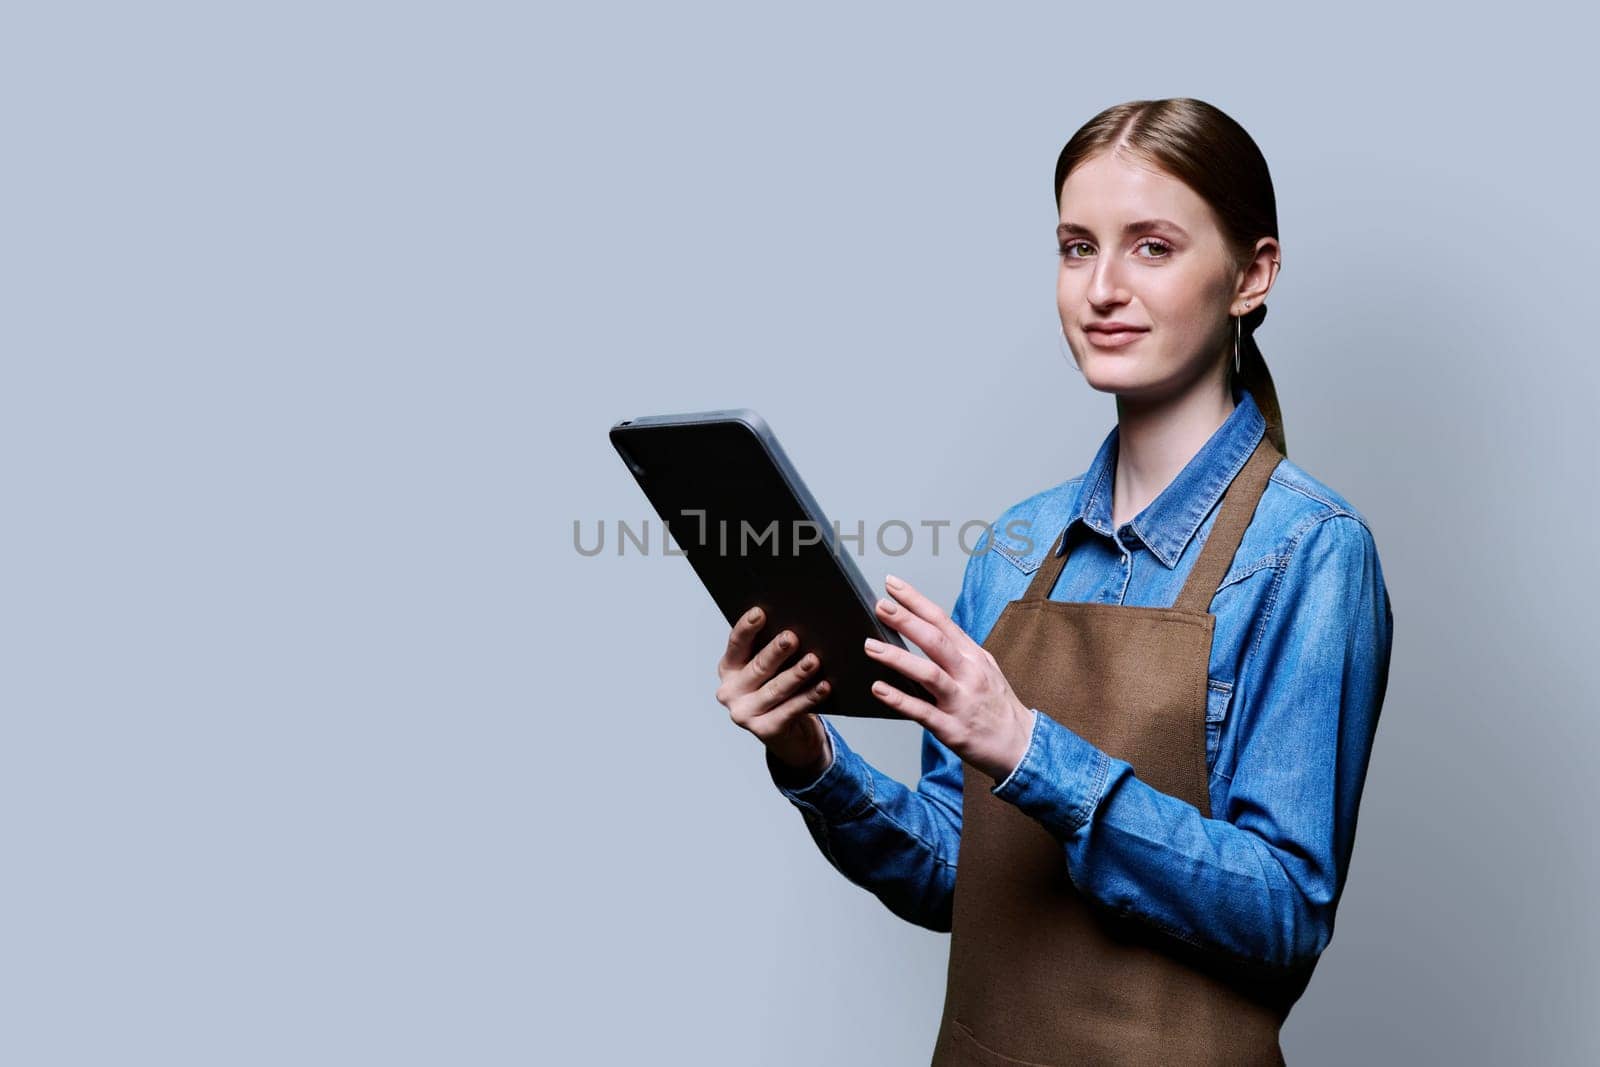 Young smiling female worker in apron uniform holding digital tablet on gray studio background. Digital technologies in business work, Internet apps applications for online orders and customer service